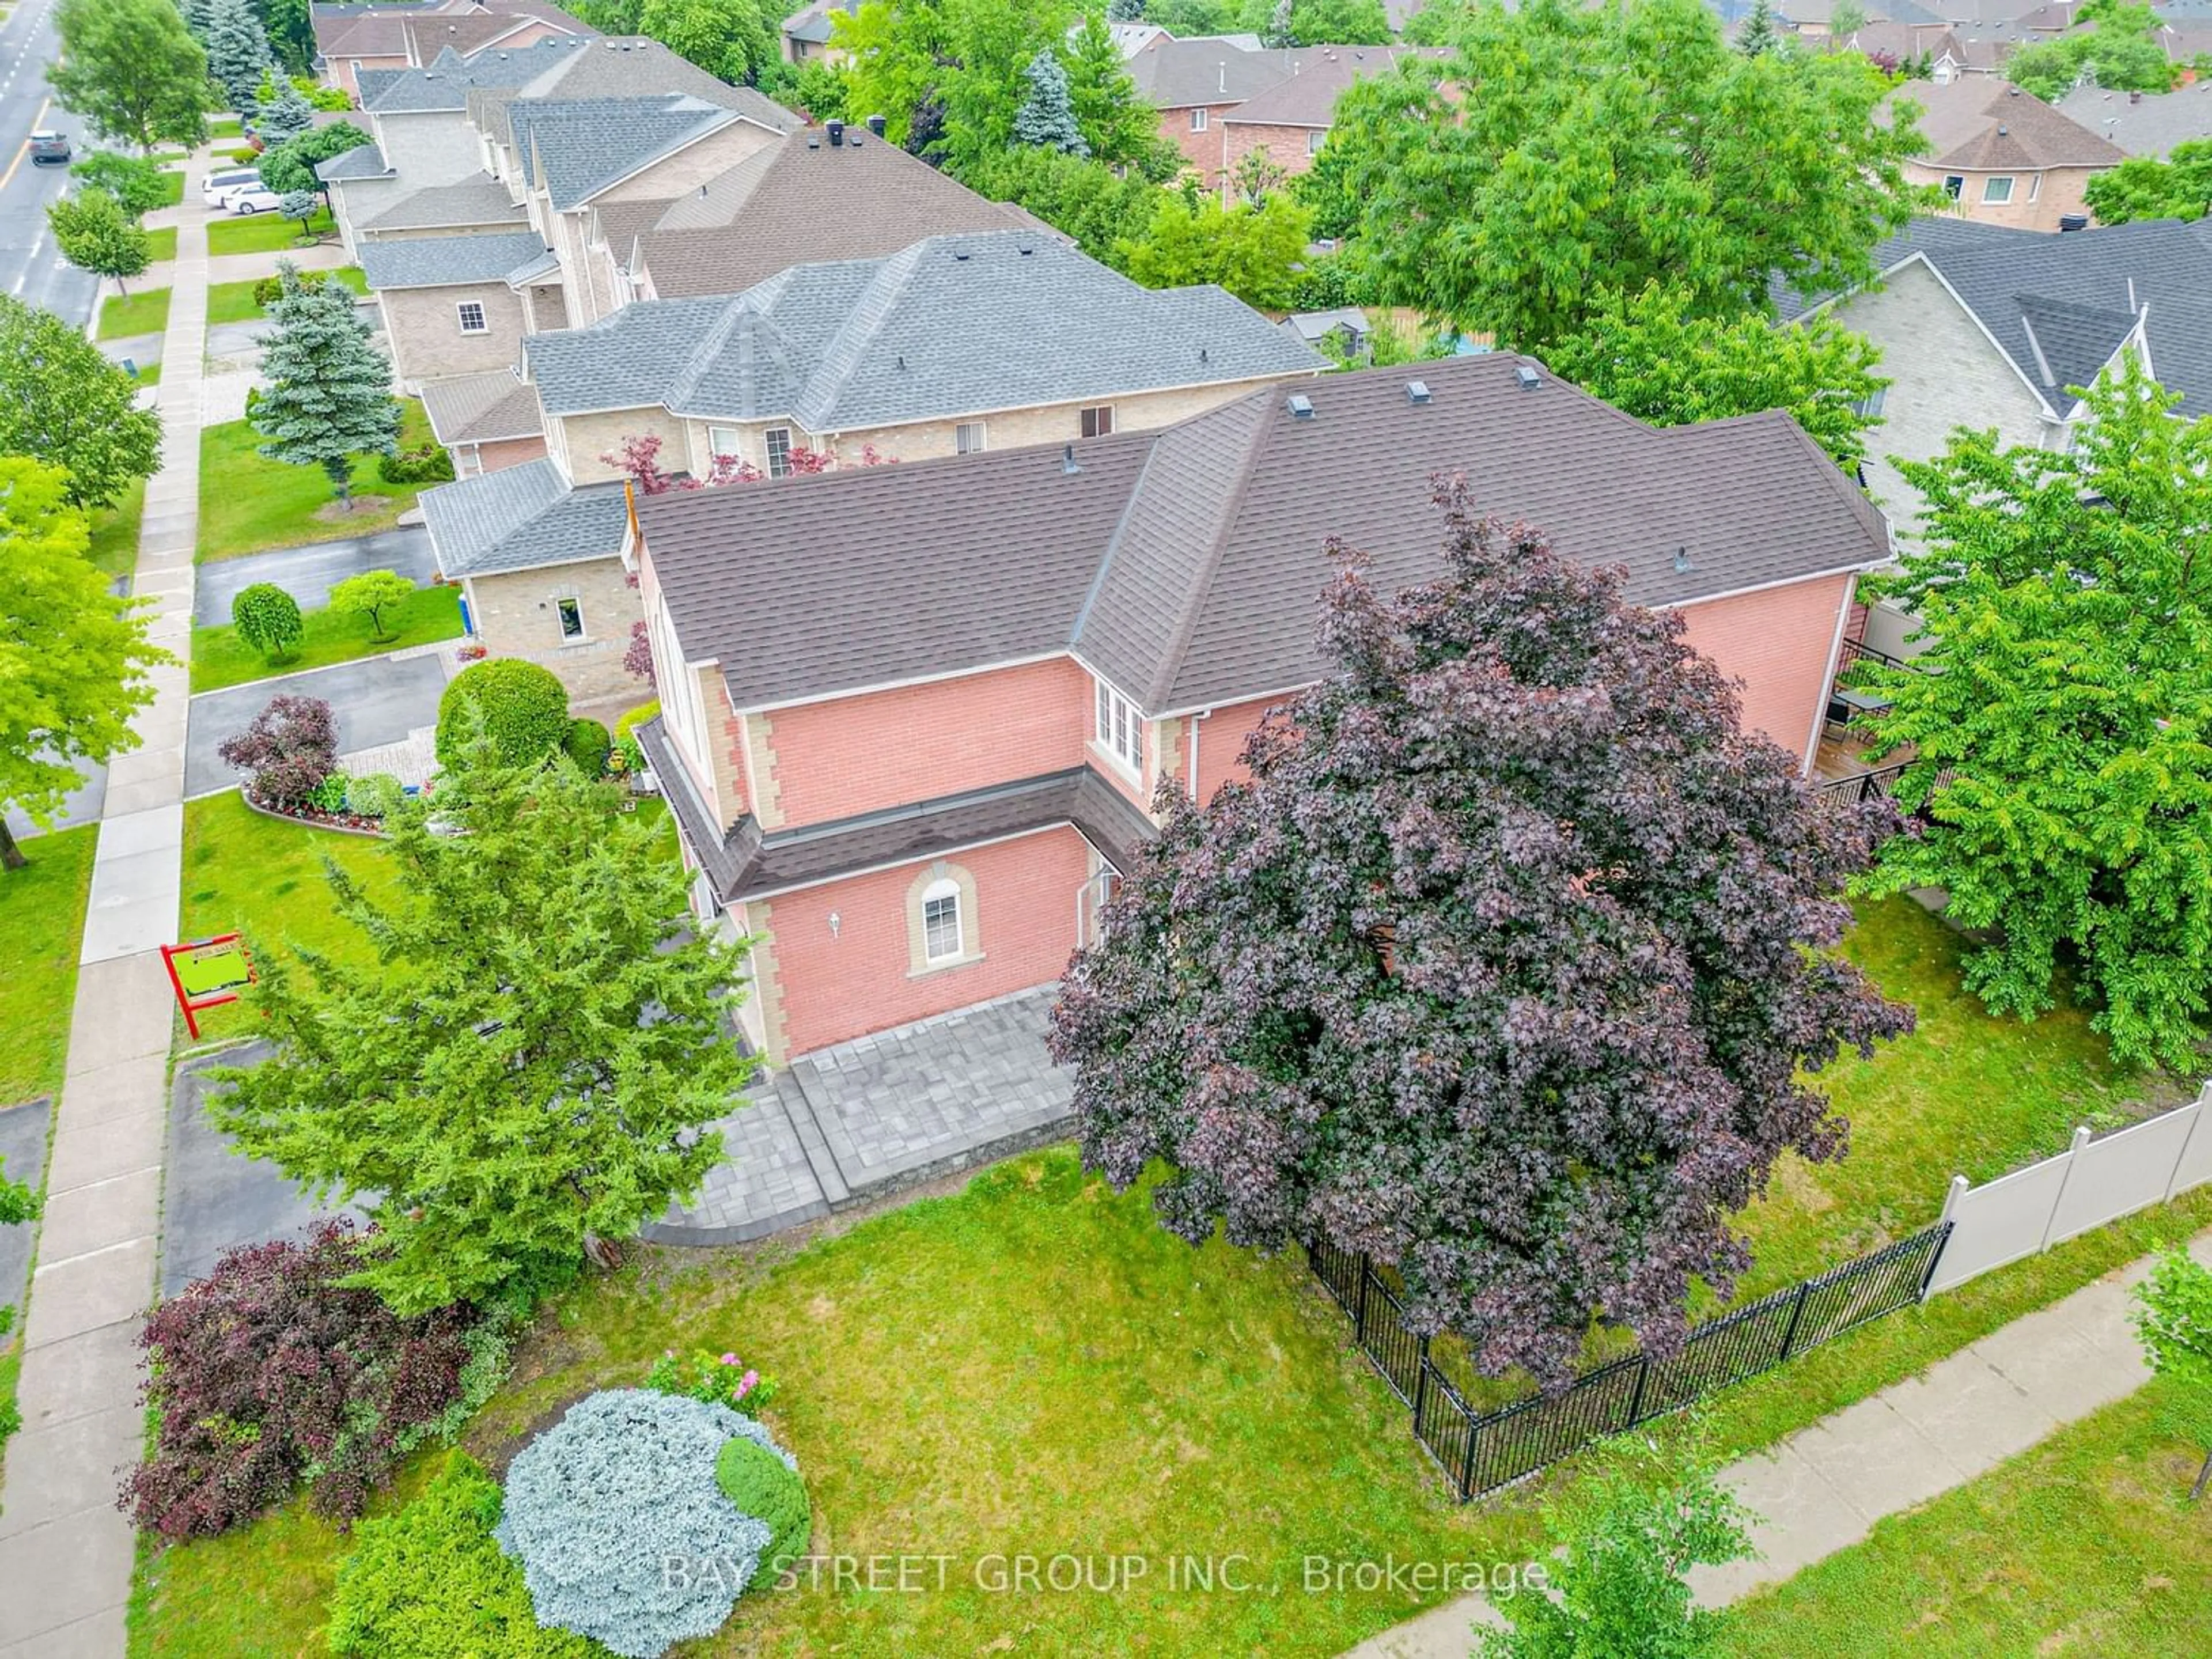 Frontside or backside of a home for 645 Carlton Rd, Markham Ontario L3P 7T1